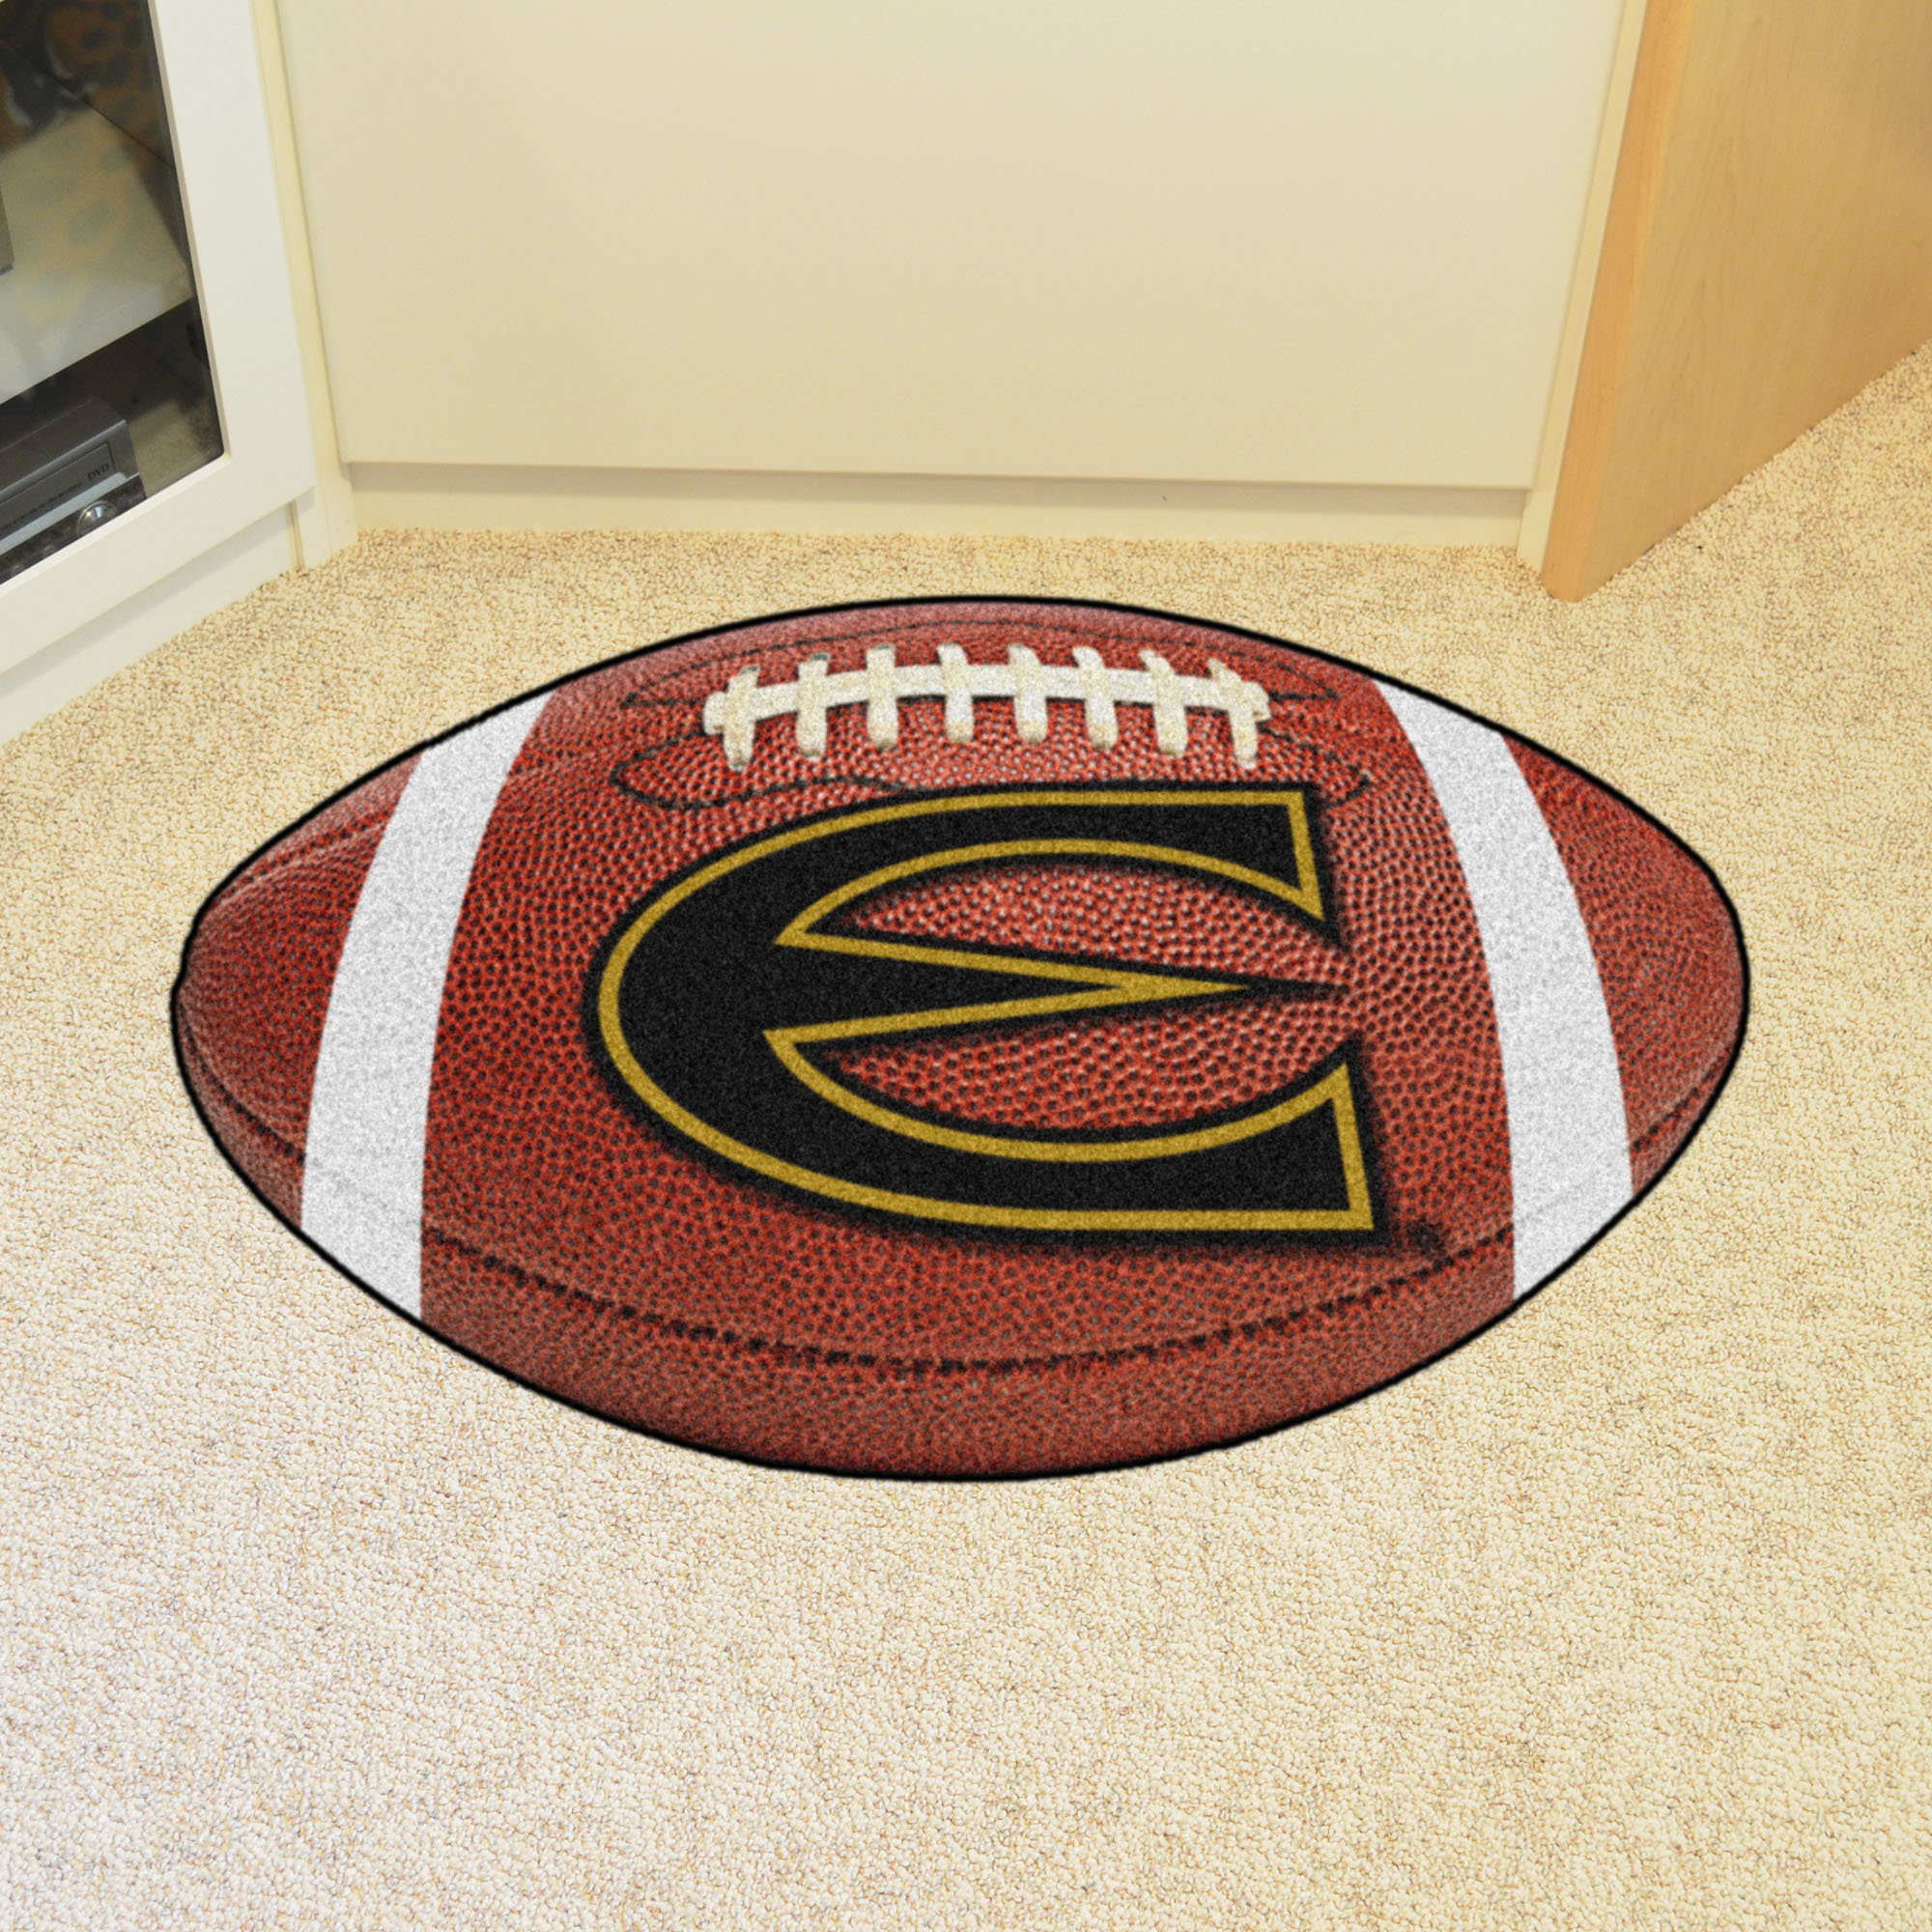 Emporia State University Ball Shaped Area Rugs (Ball Shaped Area Rugs: Football)